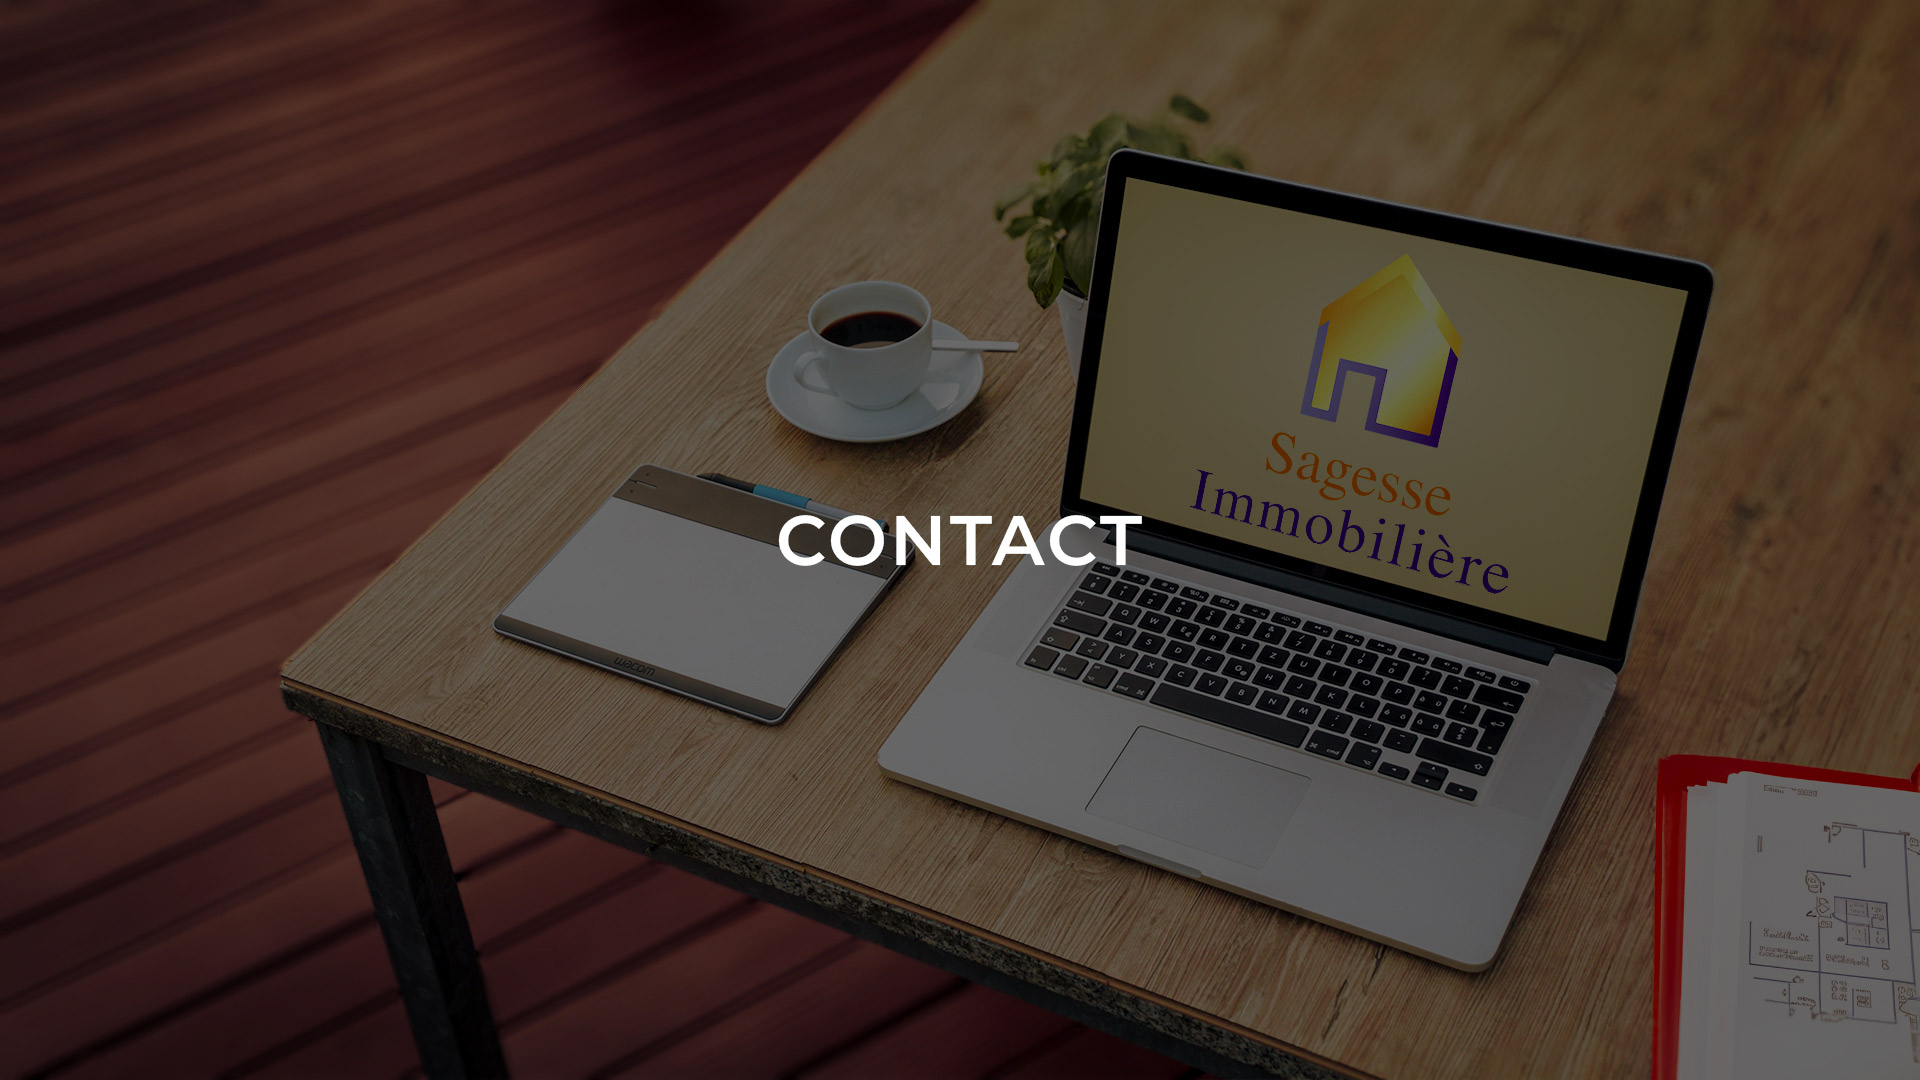 Sagesse-immobiliere-page-contact